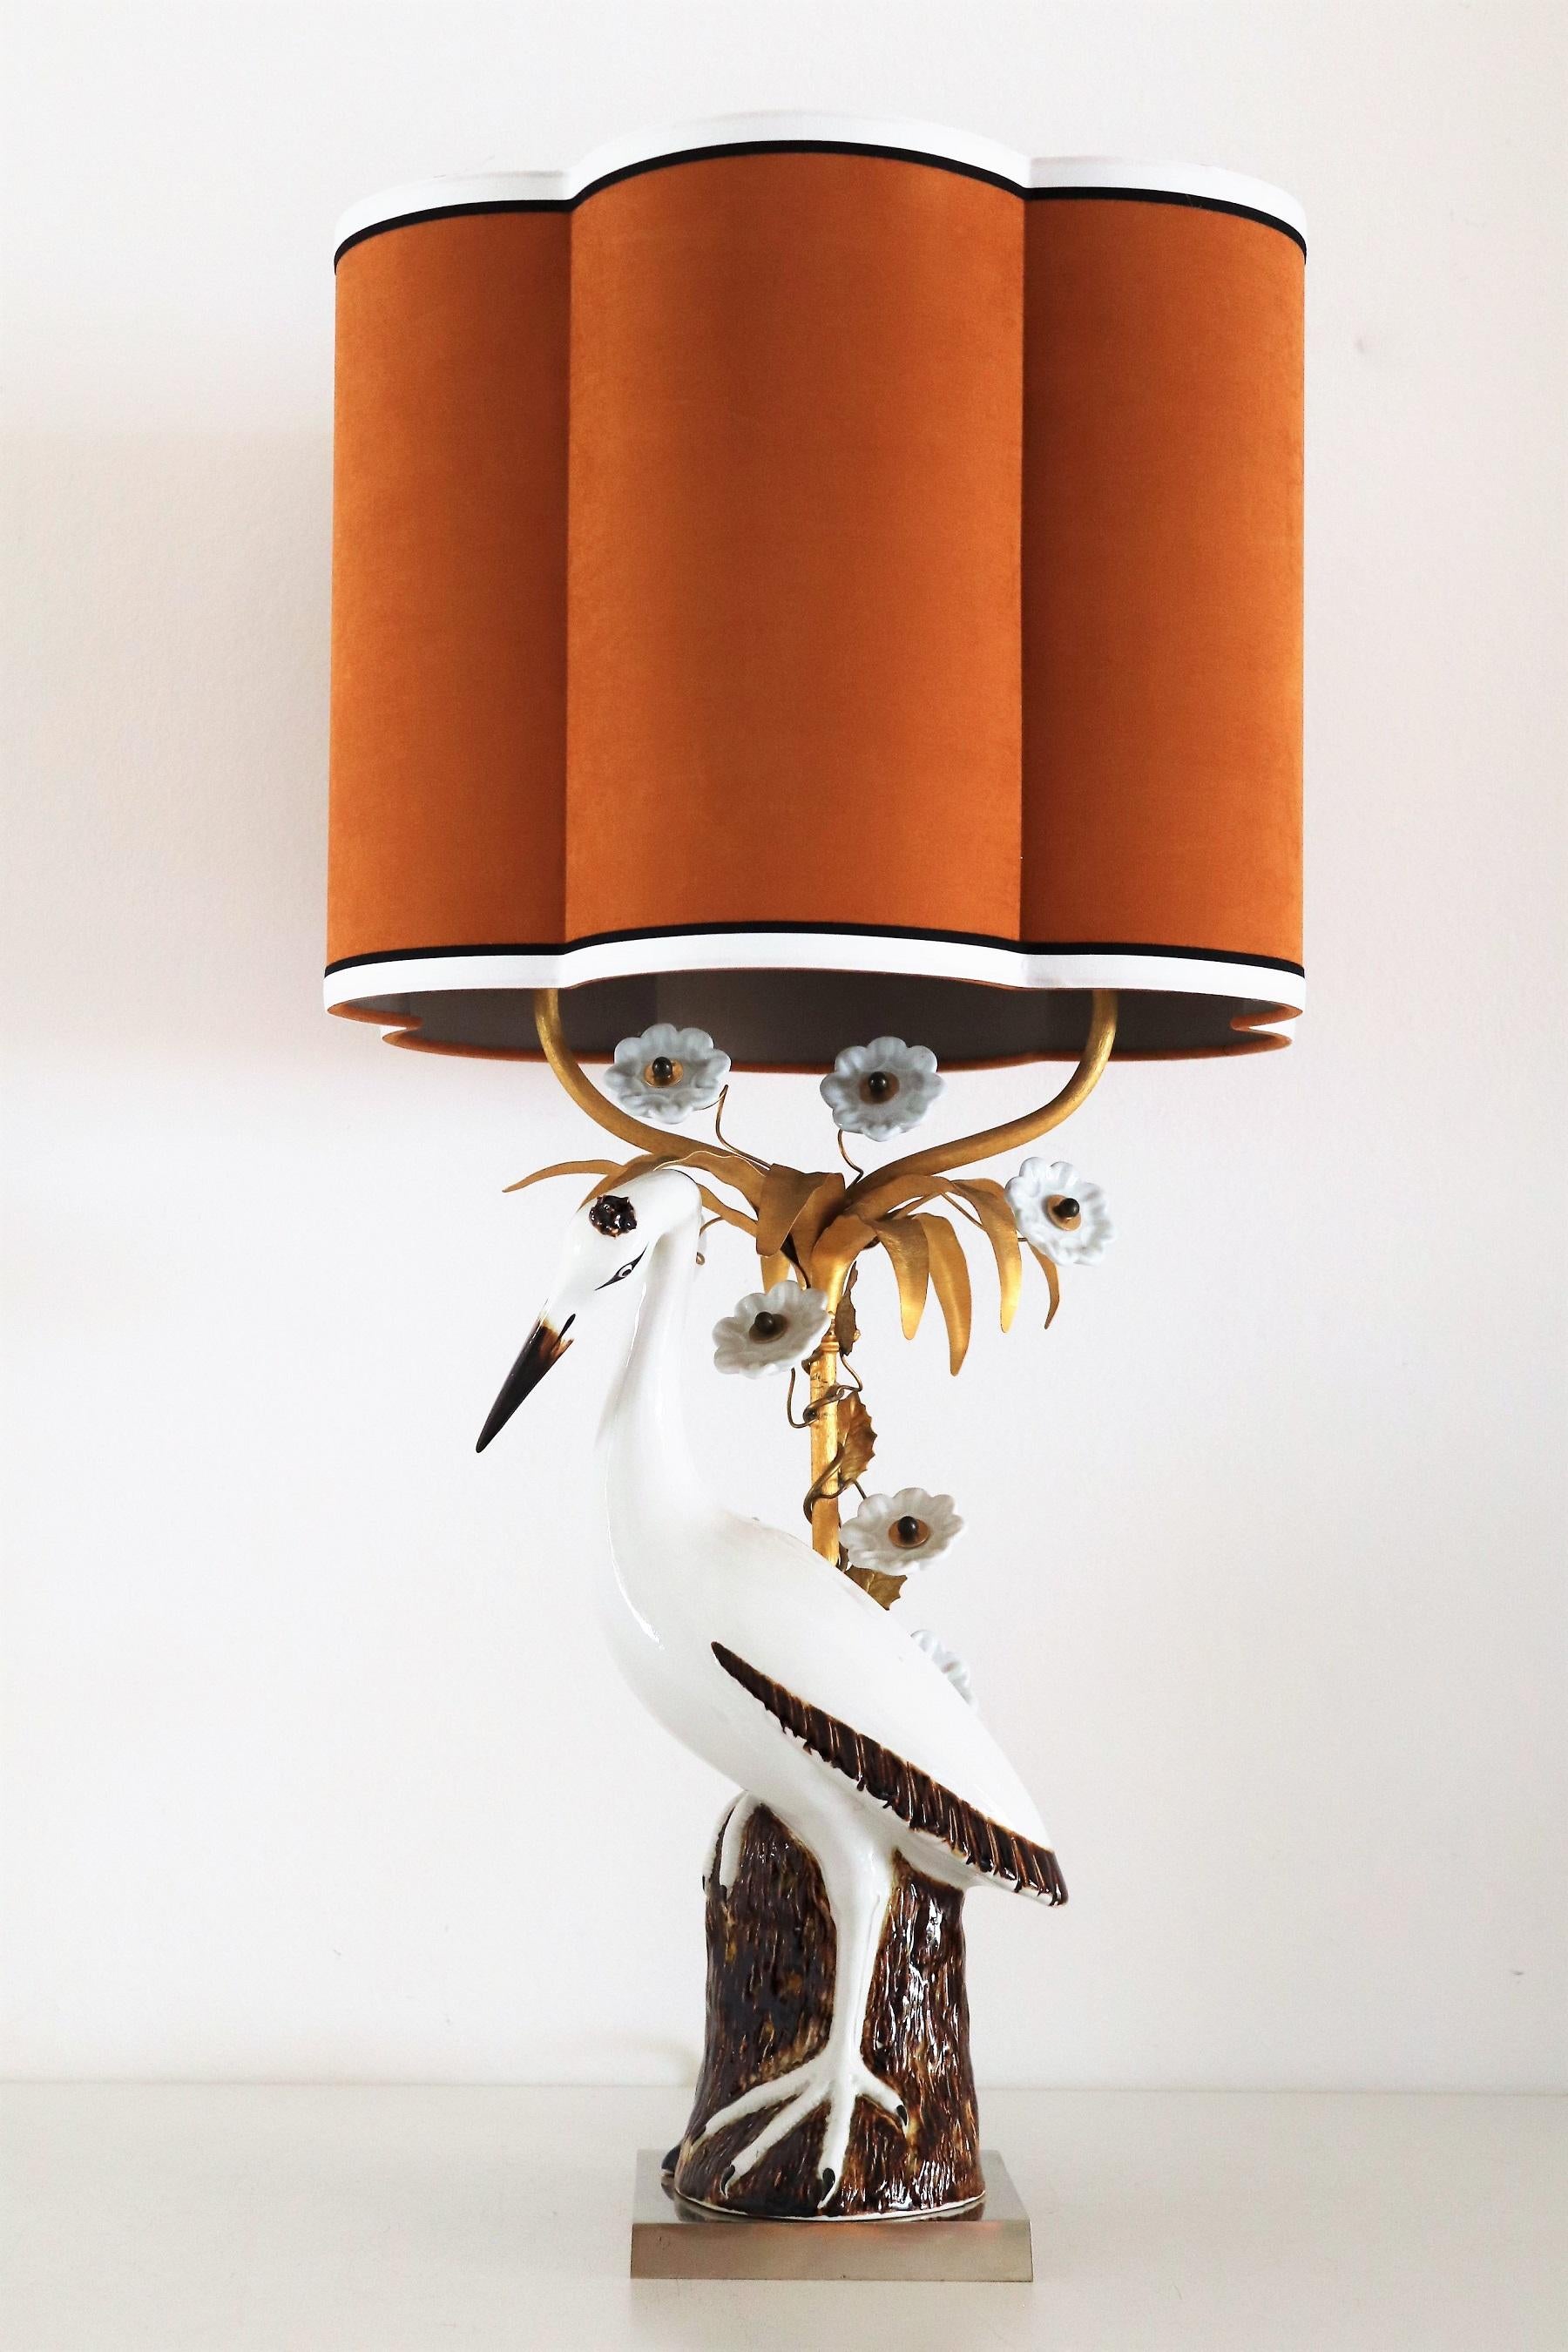 French Table Lamp with Porcelain Crane or Heron and Flowers, 1970s For Sale 13